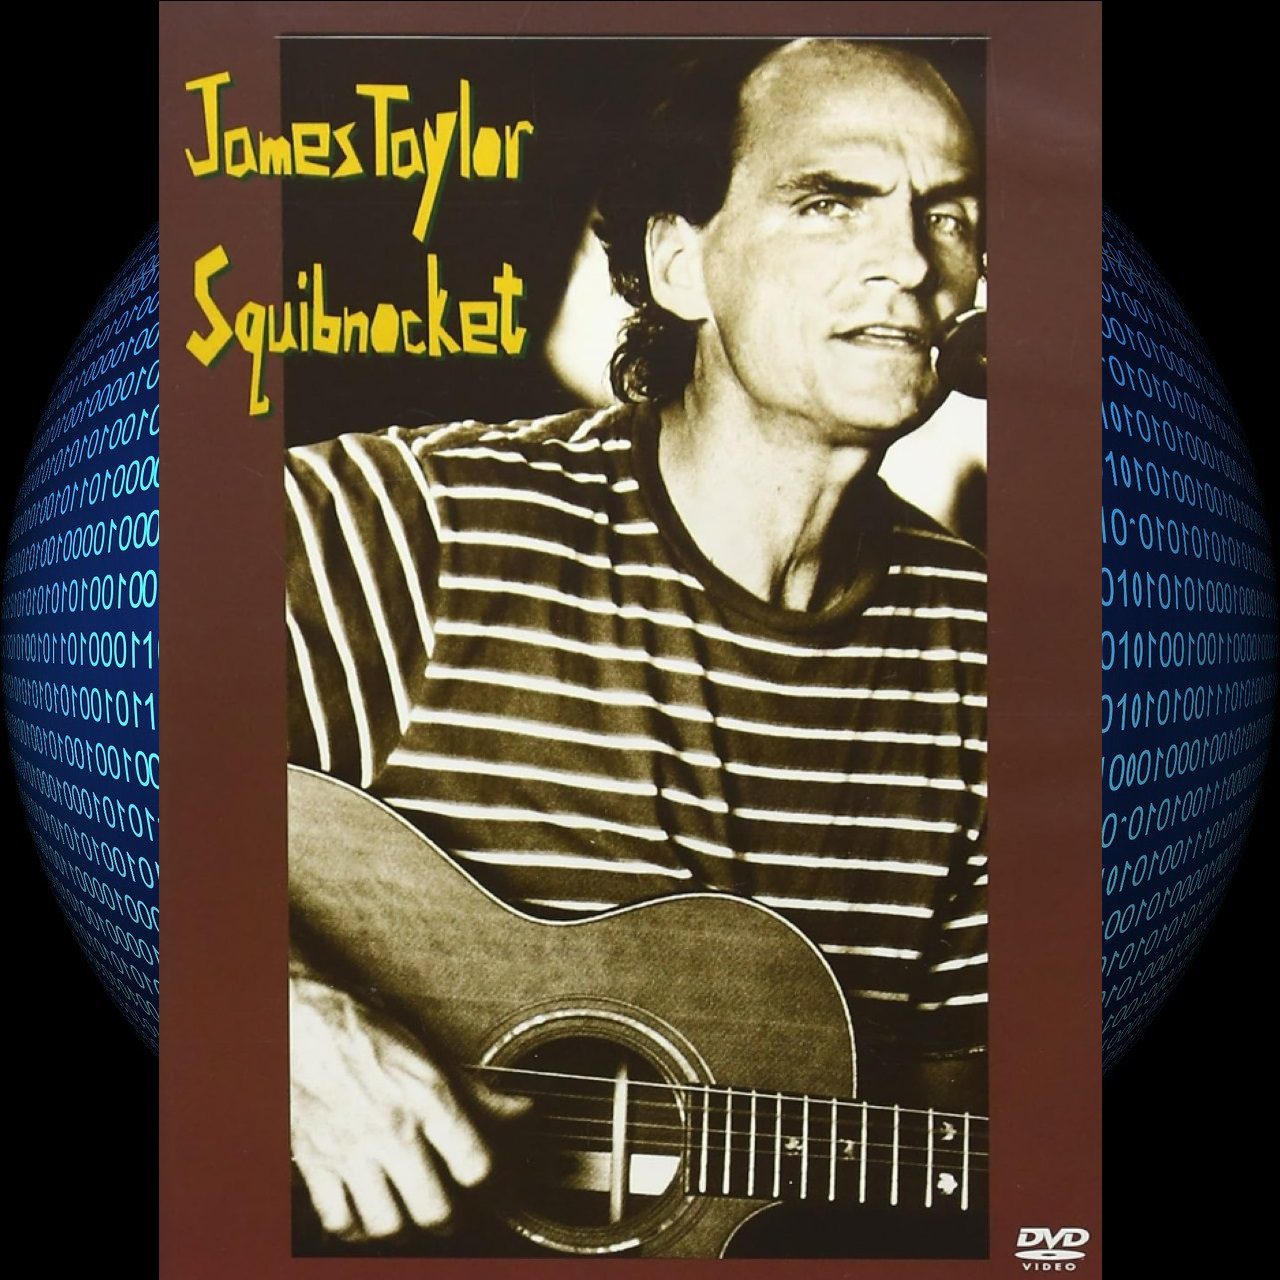 James Taylor – Squibnocket cover DVD